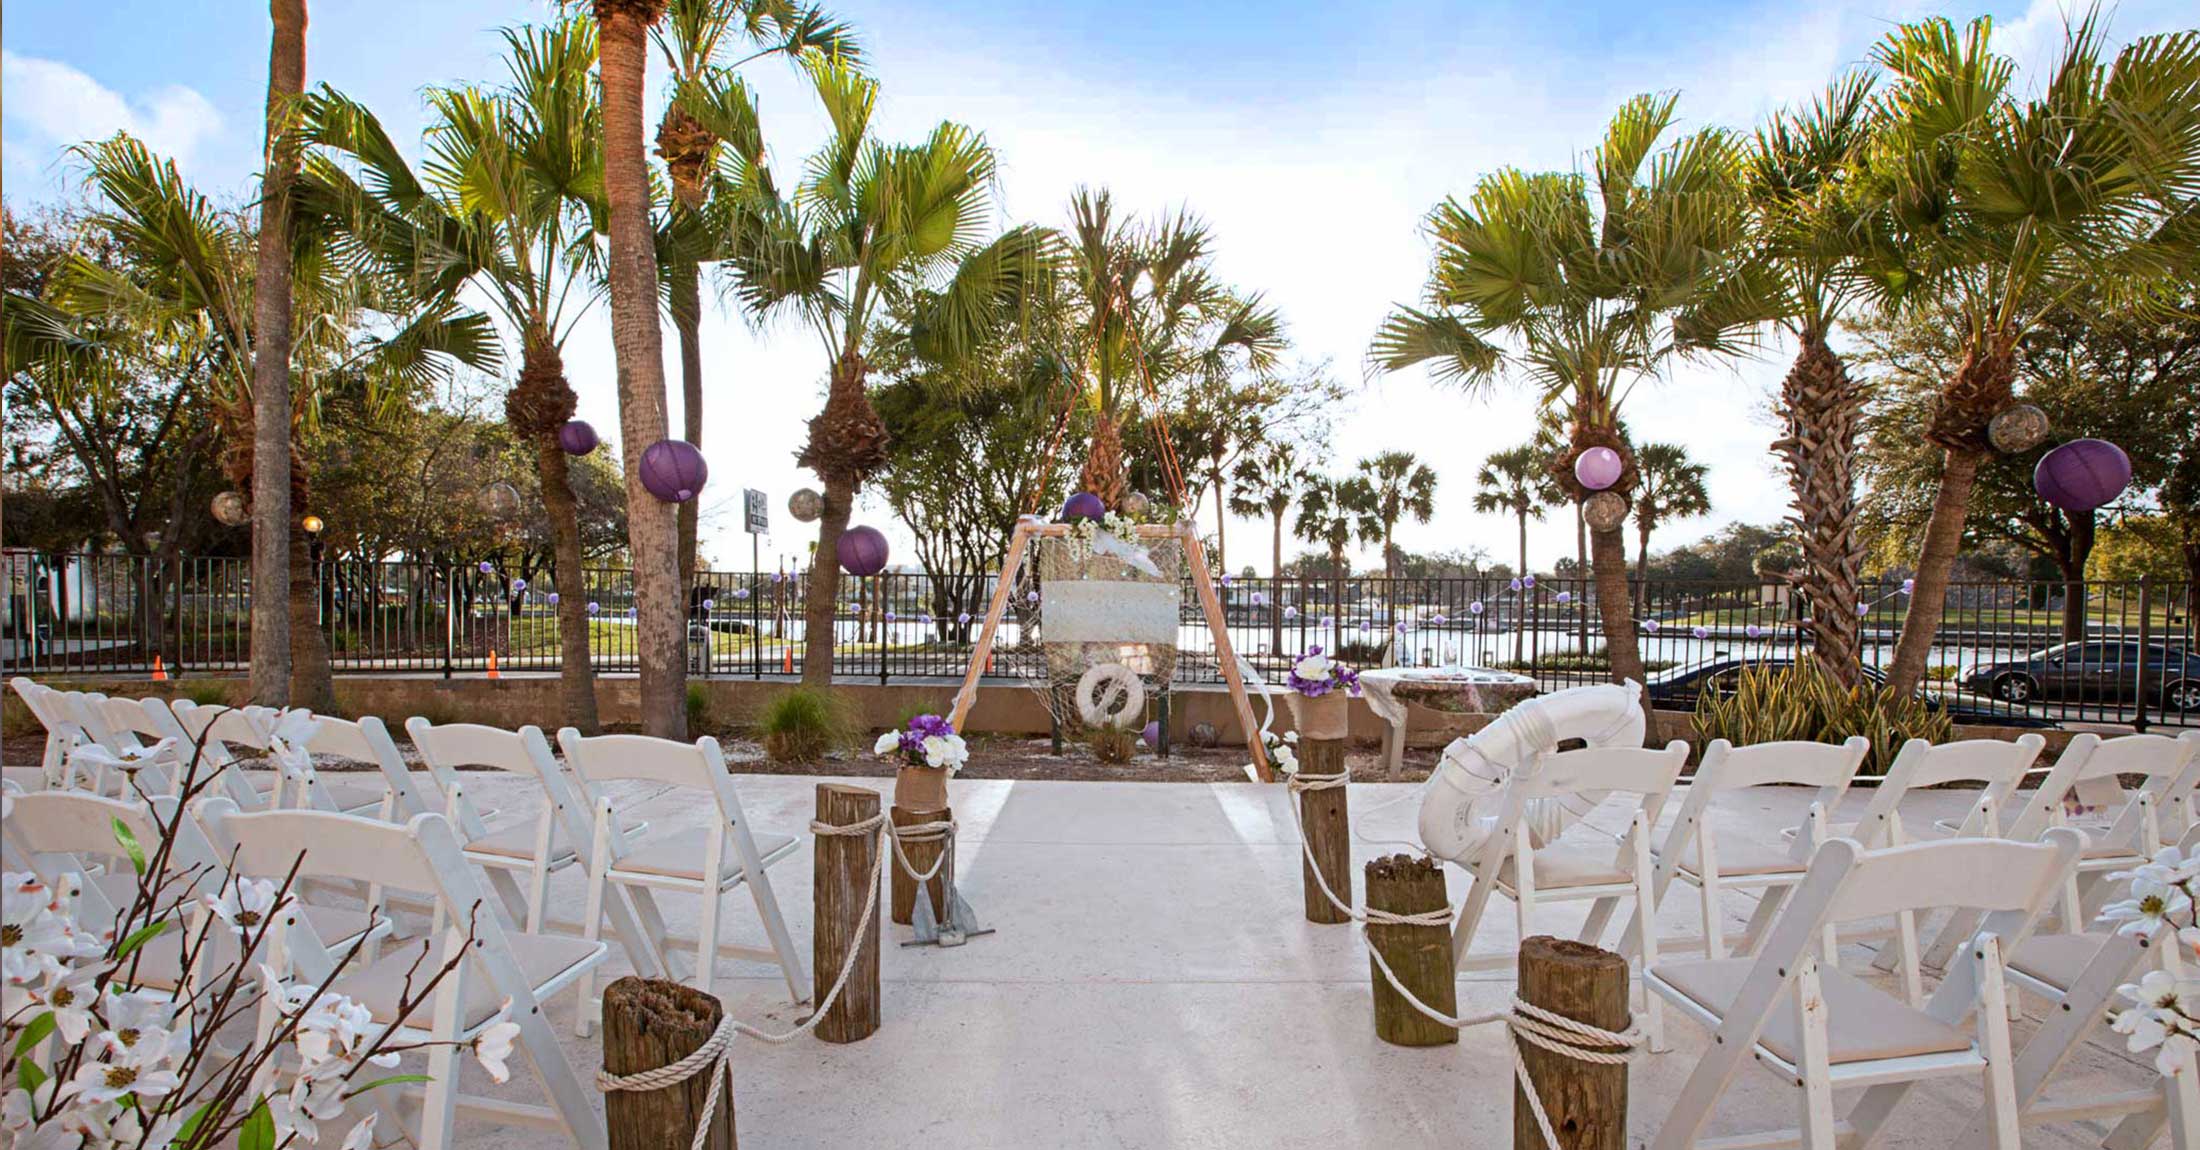 wedding ceremony setup on outdoor pool deck facing riverwalk and river